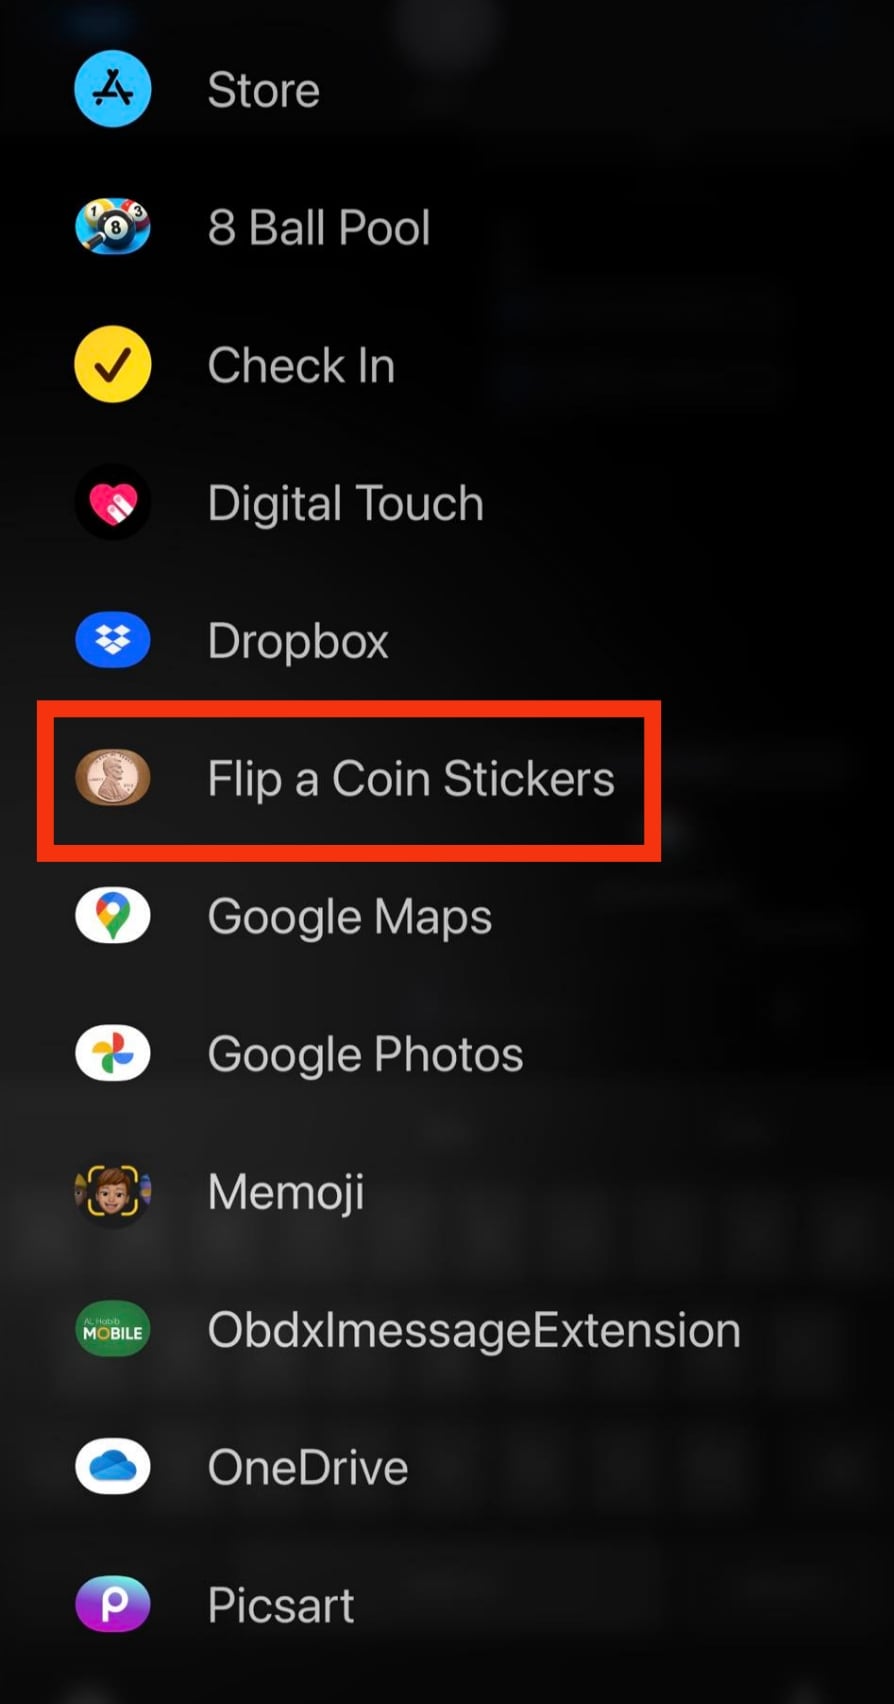 Select The Flip A Coin App From The Apps Tray